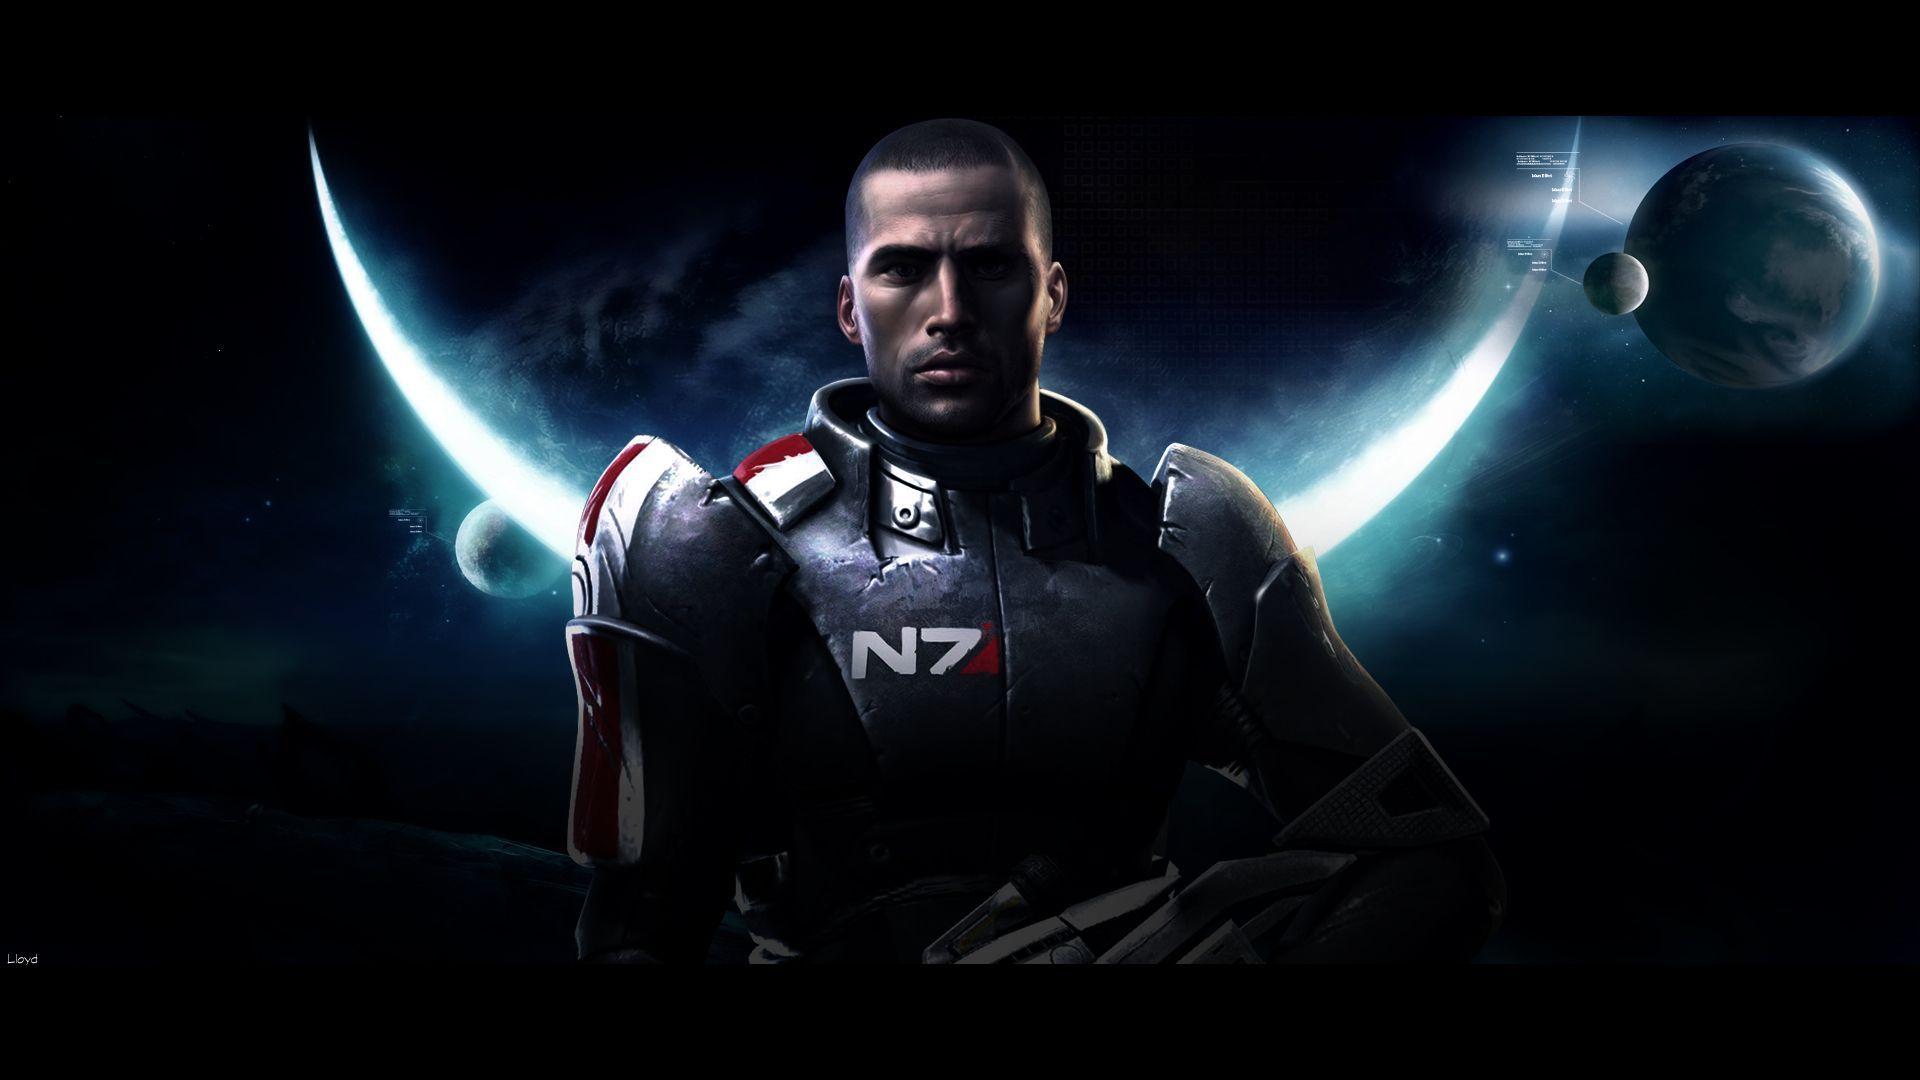 Wallpapers For > Mass Effect 1 Wallpapers 1920x1080